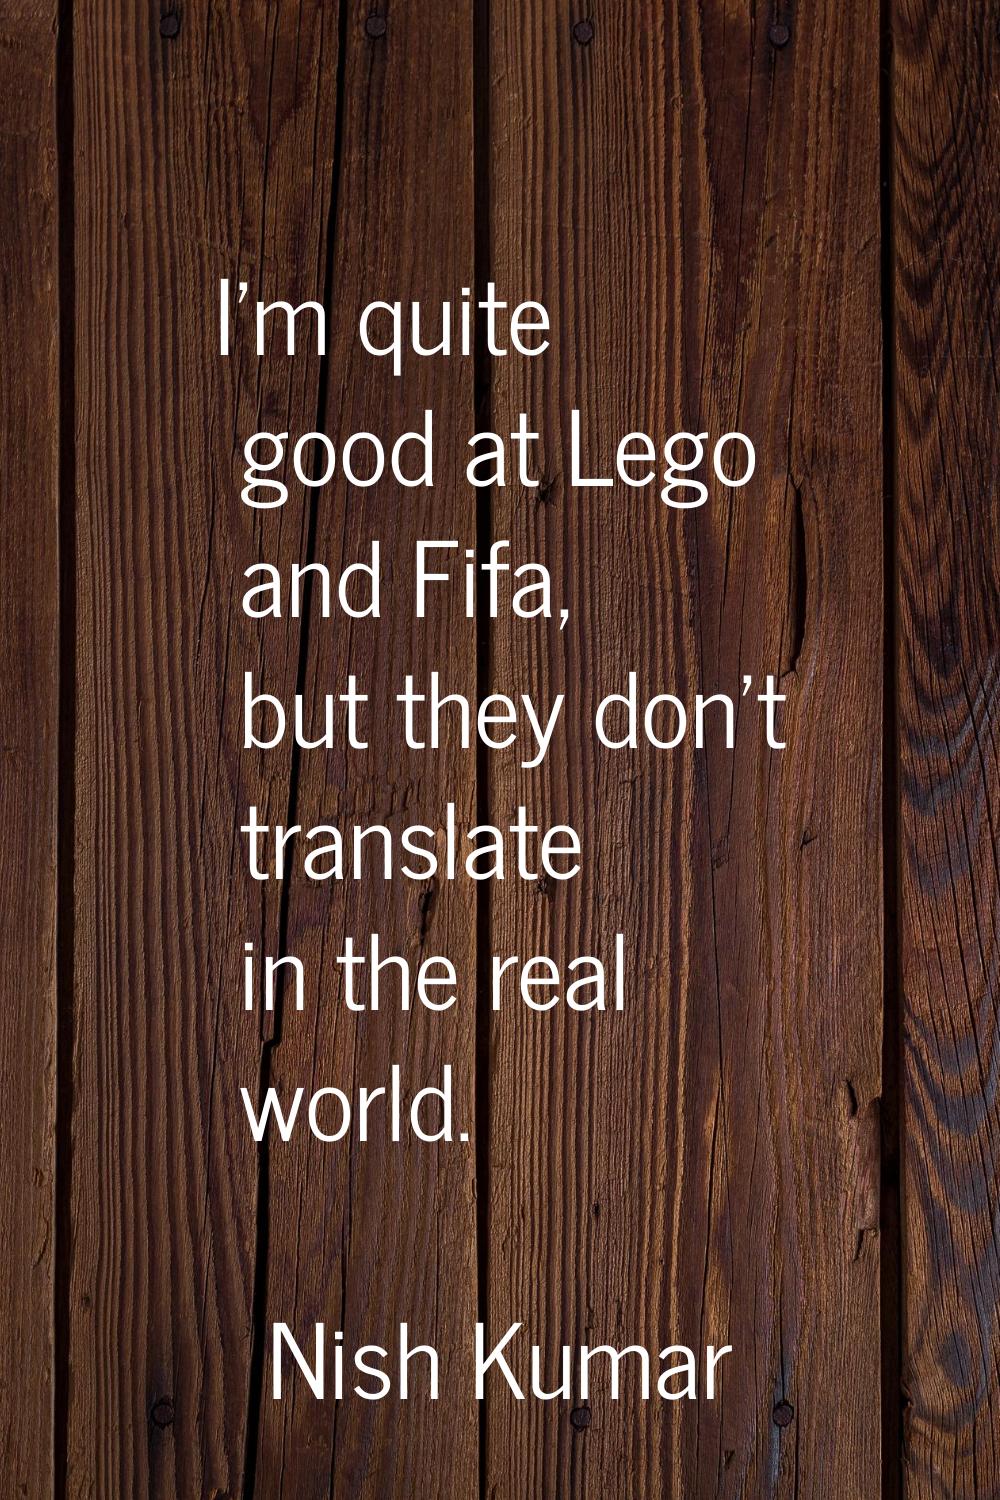 I'm quite good at Lego and Fifa, but they don't translate in the real world.